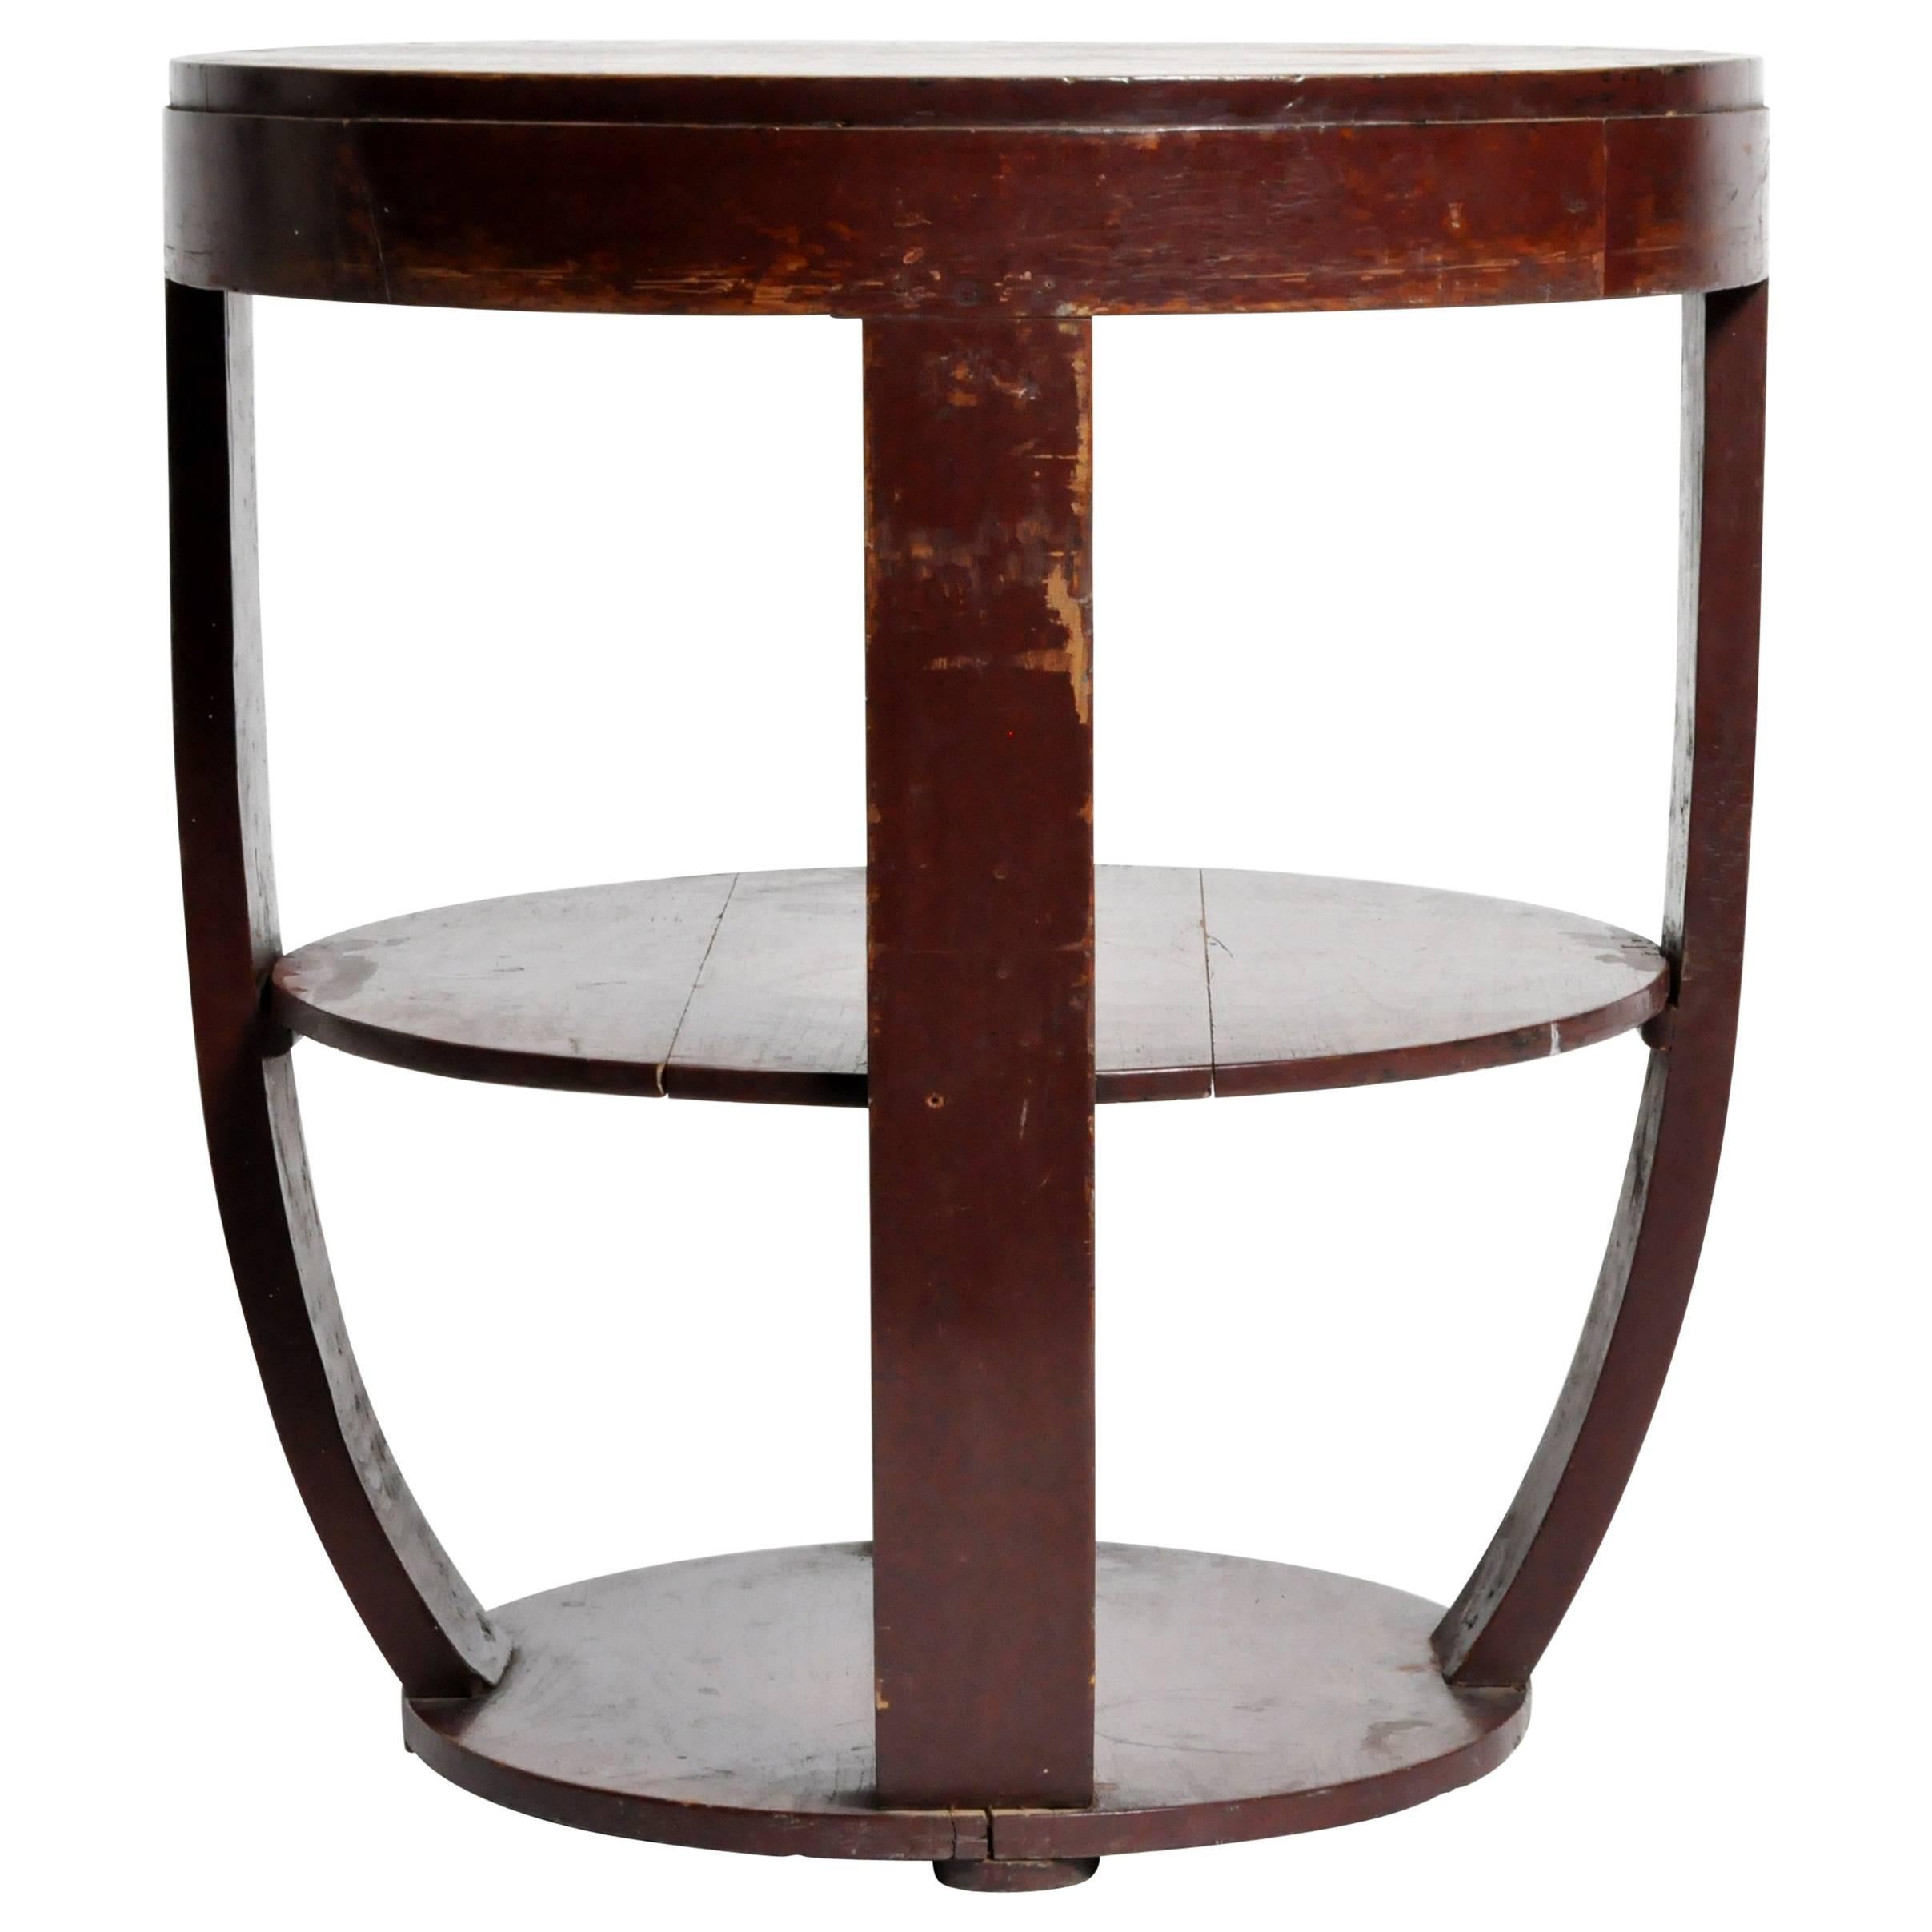 British Colonial Art Deco Round Table